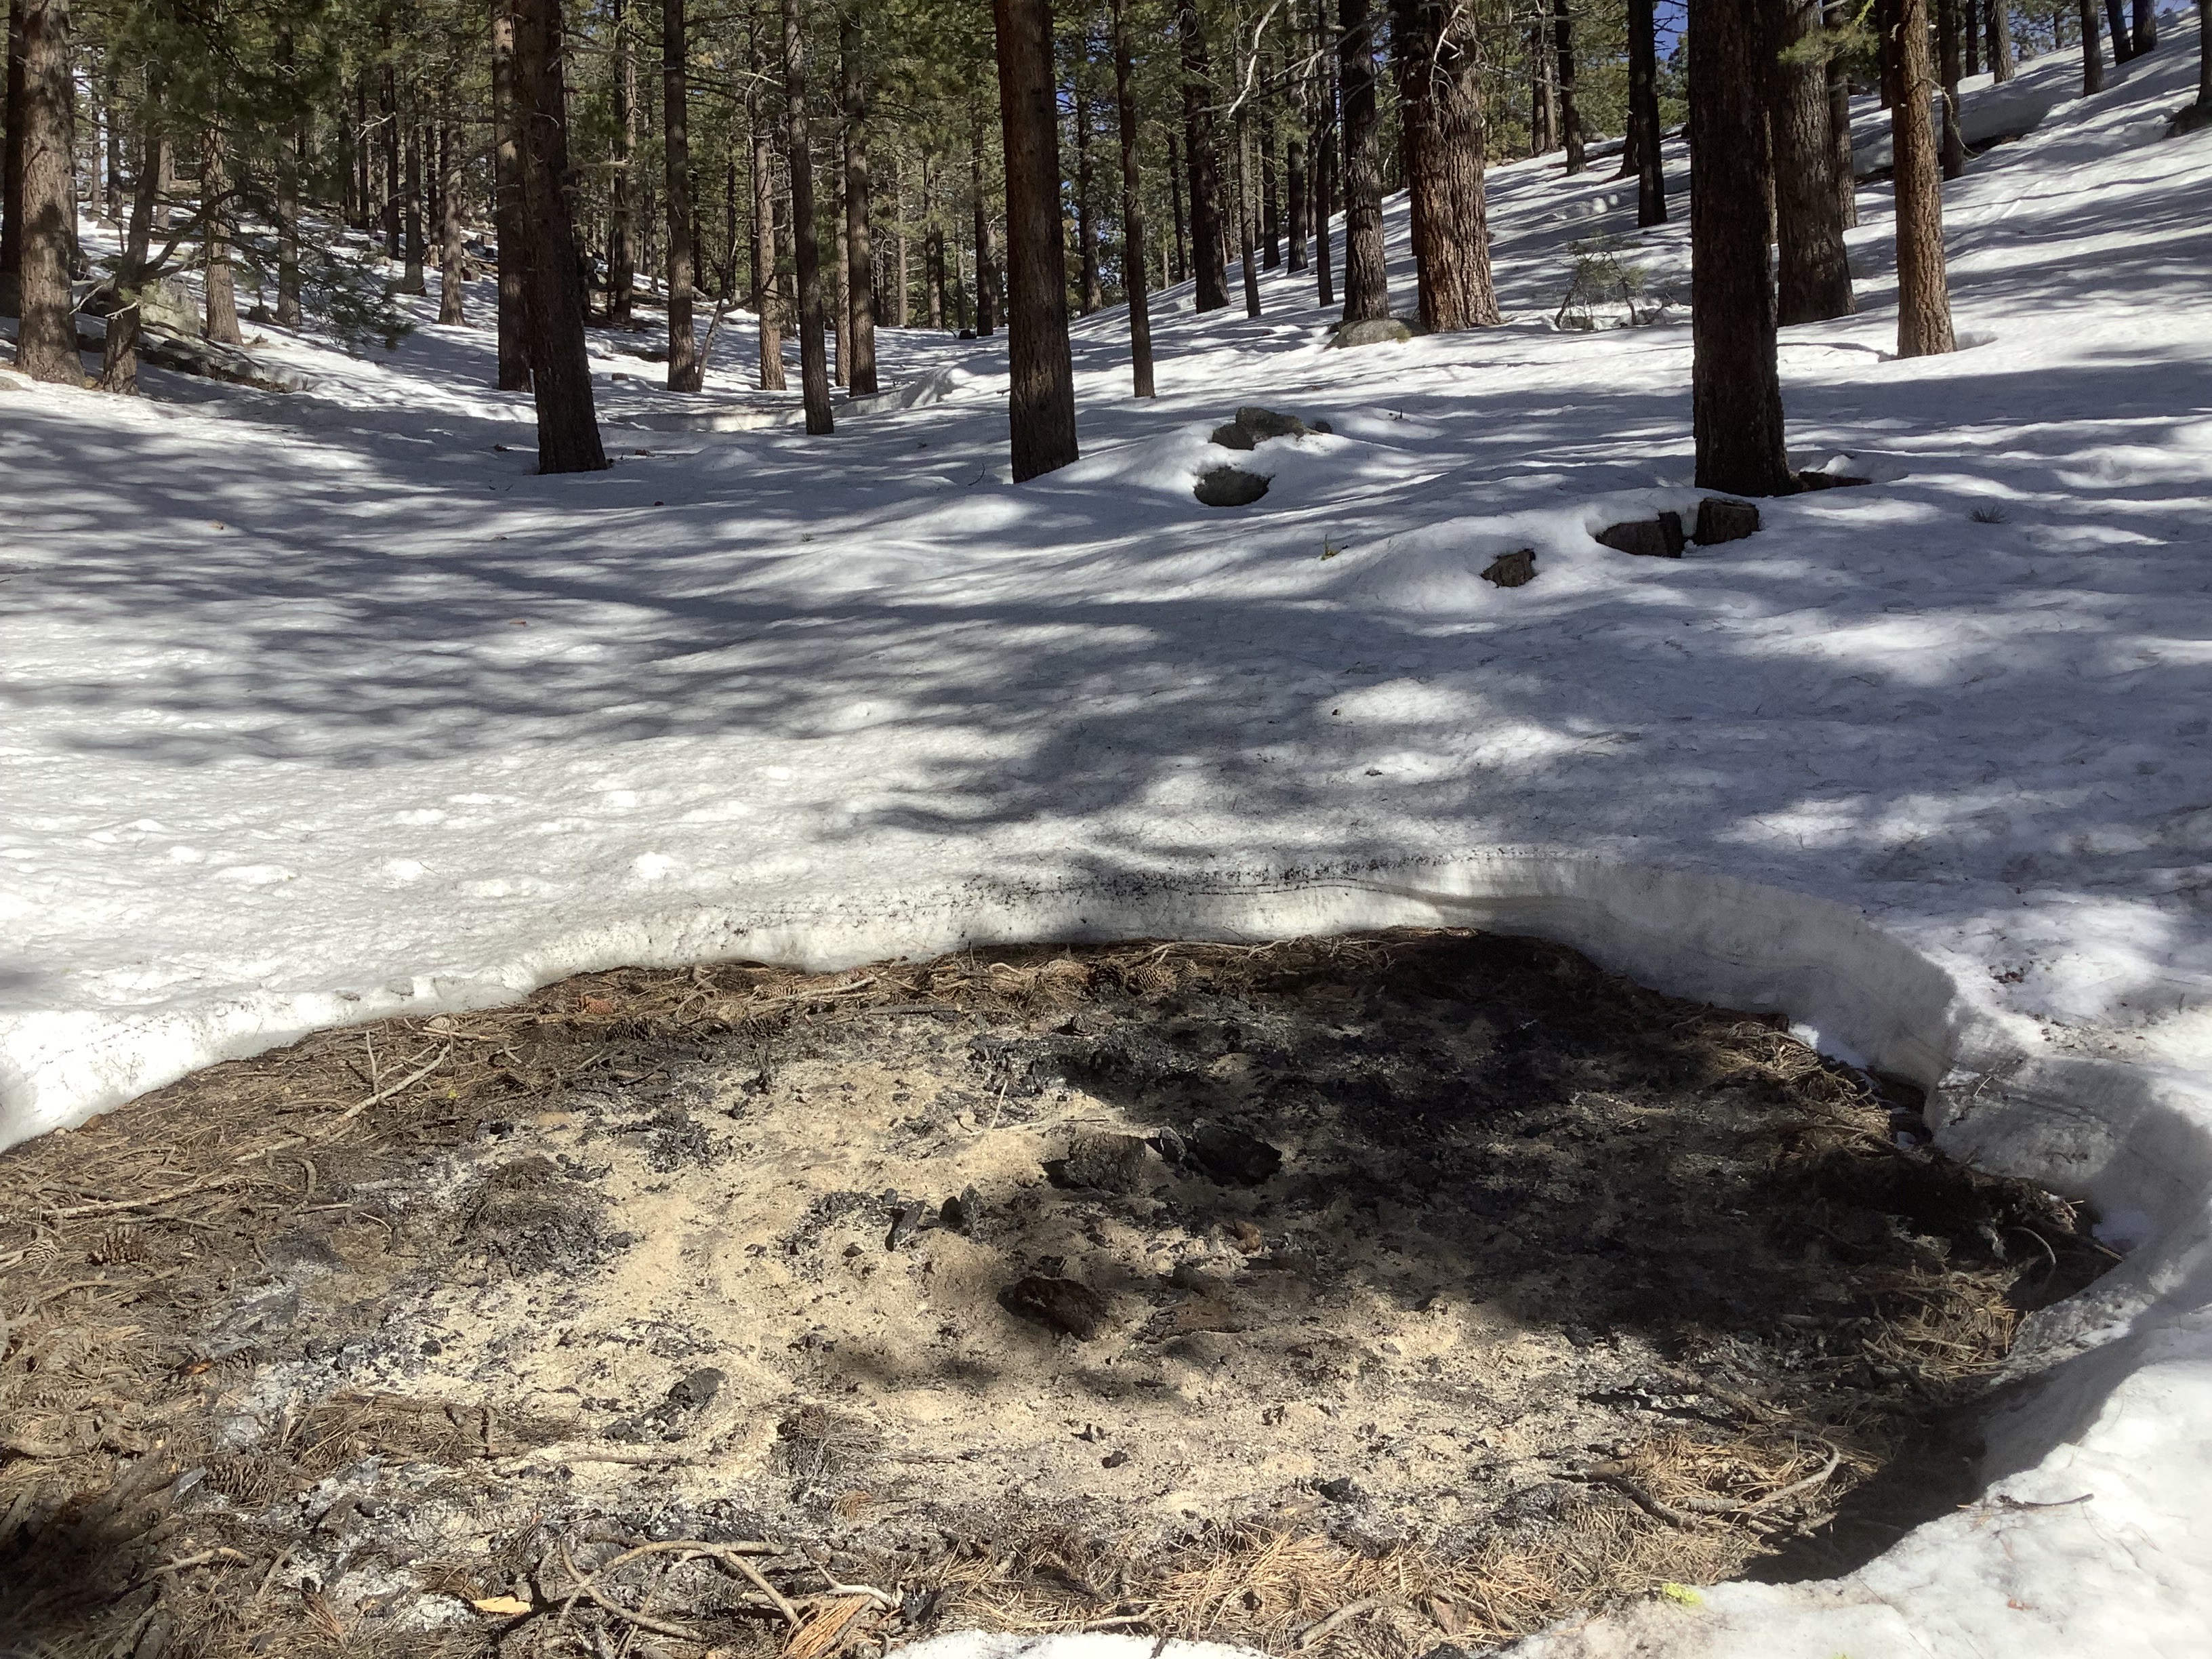 After a pile is burn, there should be no evidence of logs or flammable vegetative materials, as shown in this image. 